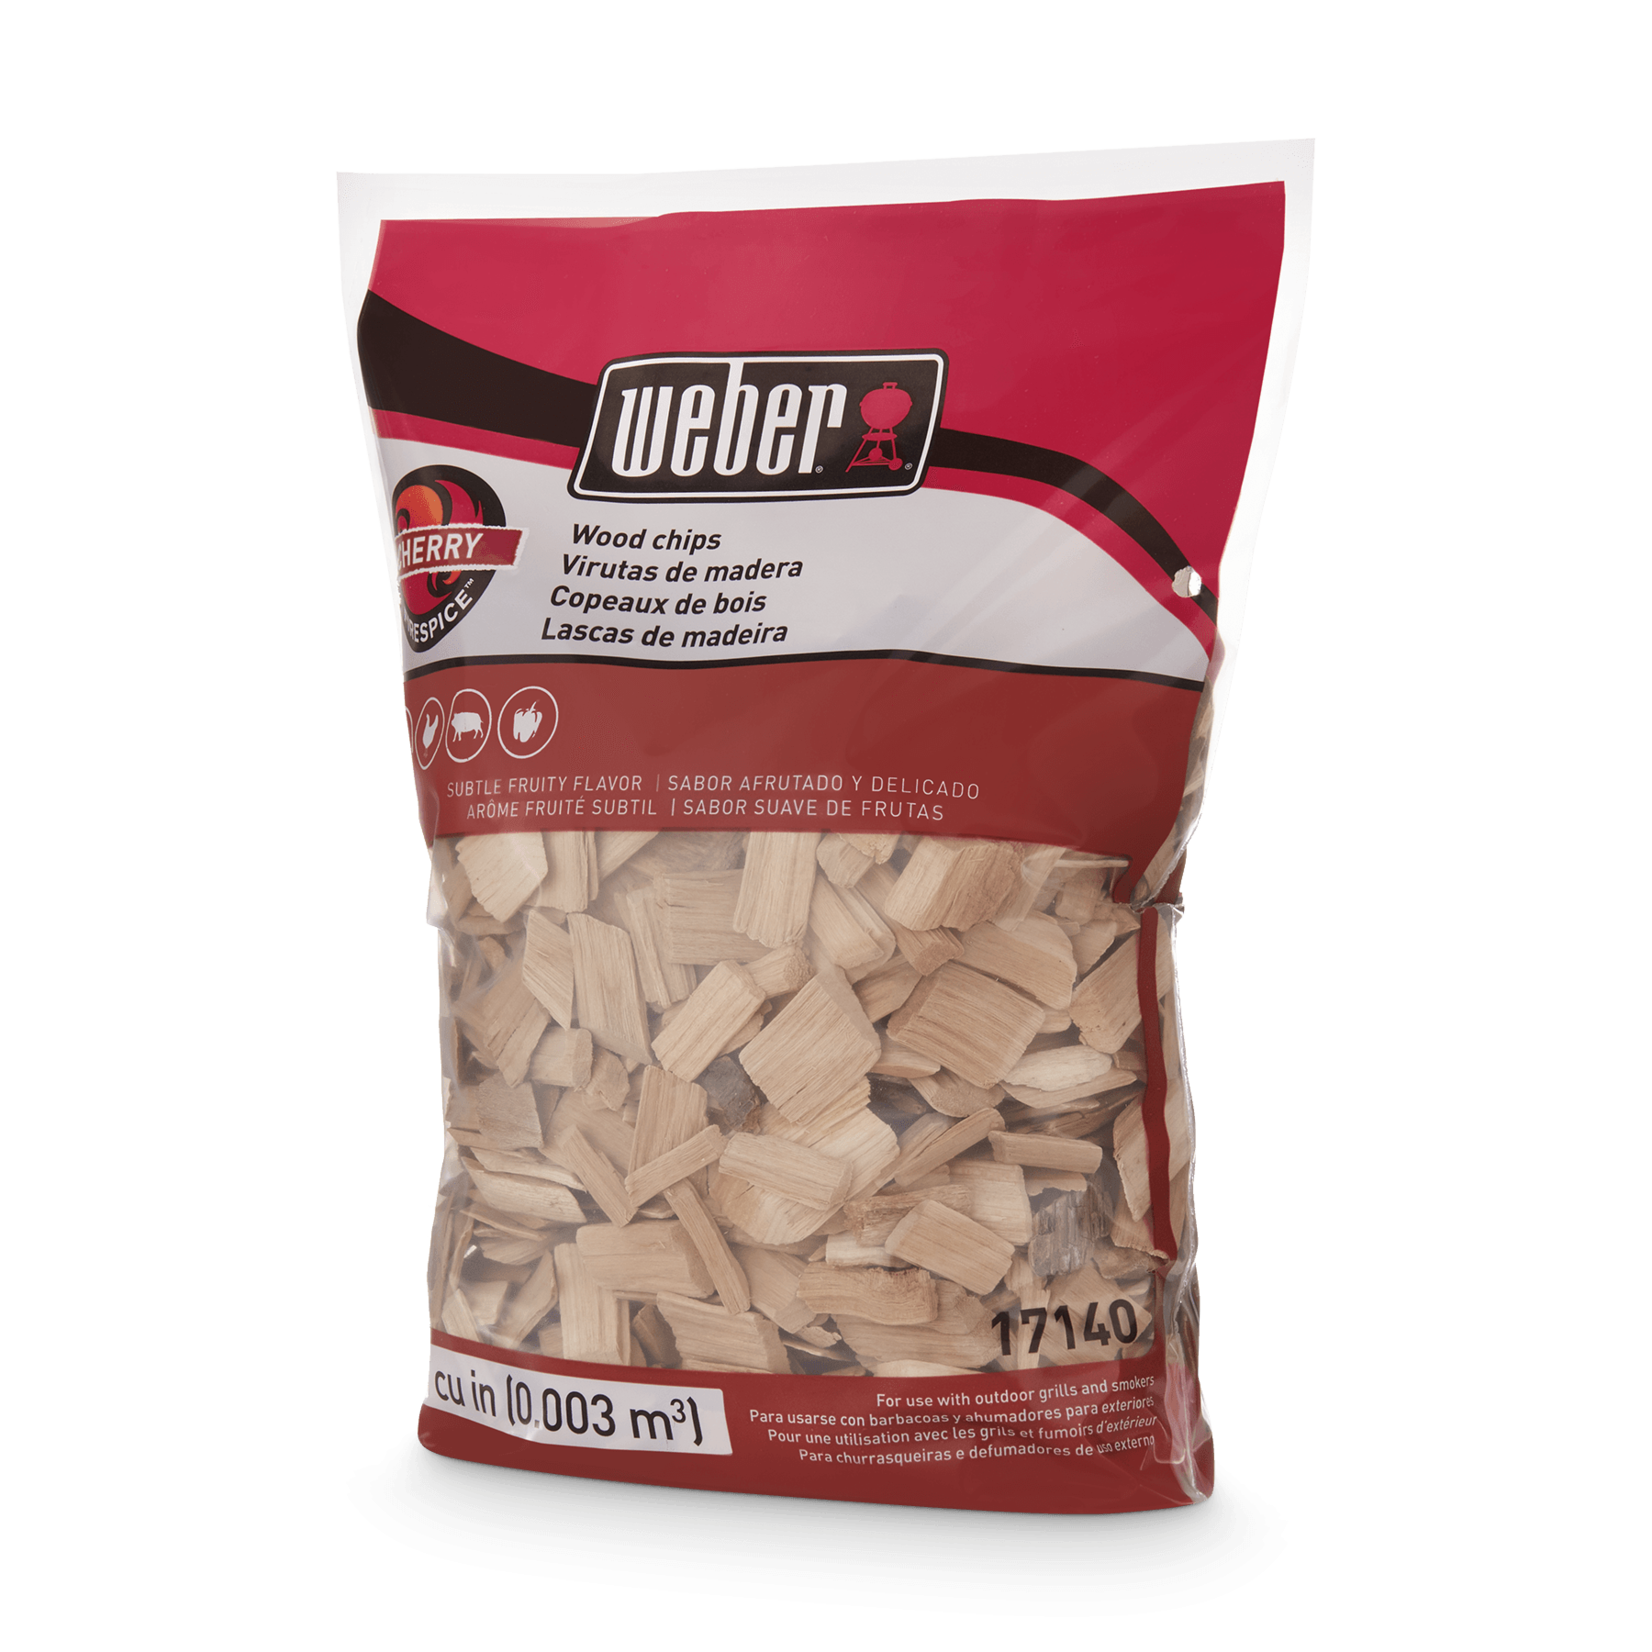 Weber Cherry Wood Chips 3L / 192 in³